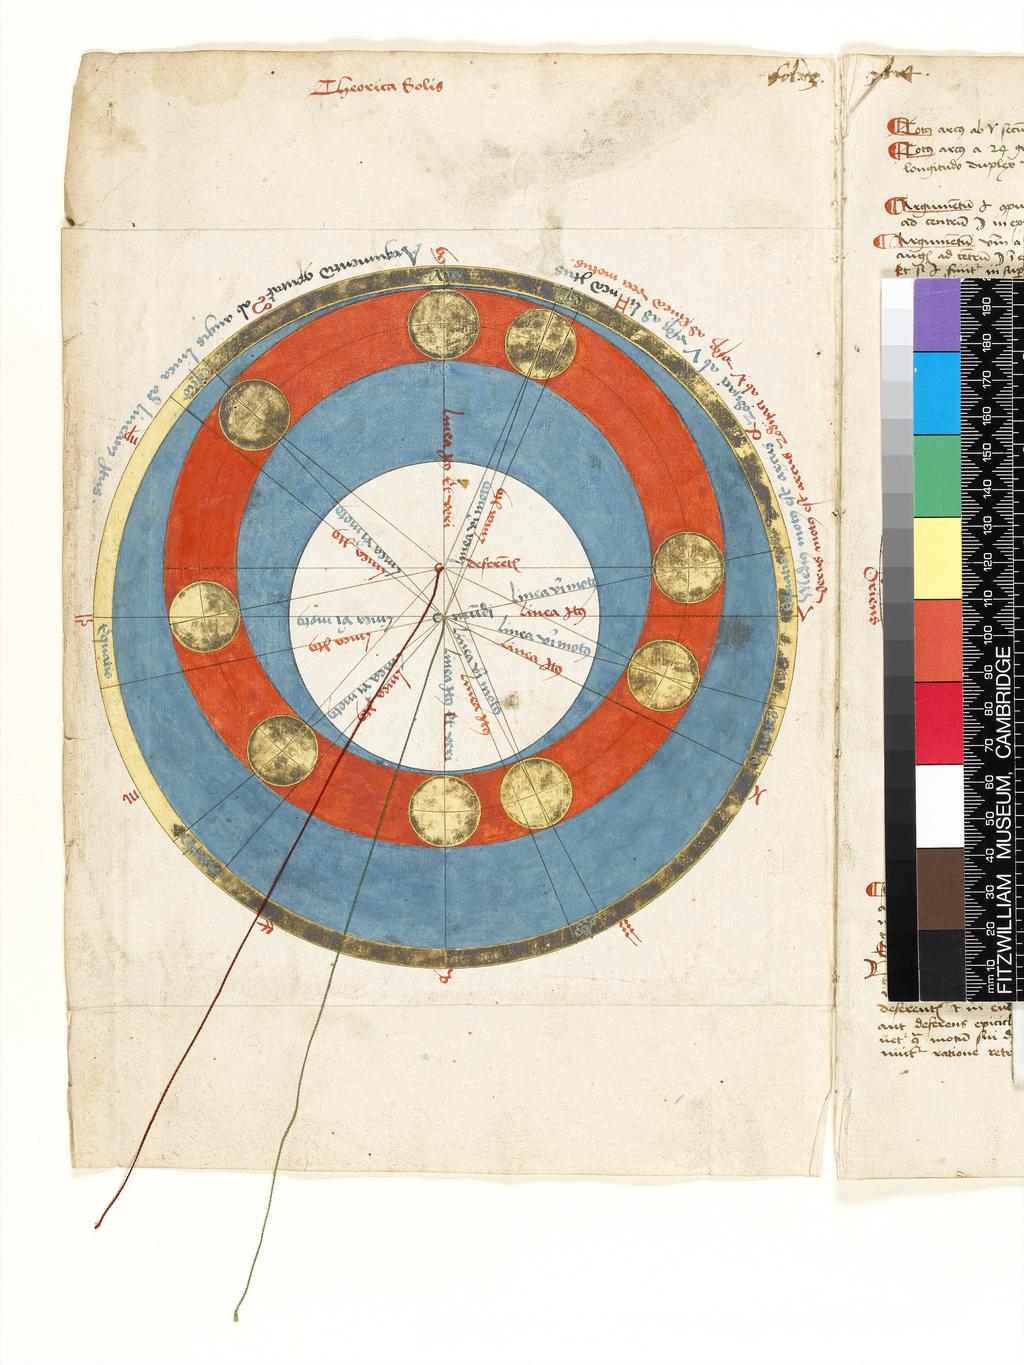 An image of Astronomical diagrams. Illuminated manuscript. Diagrams painted in red, blue, black and yellow, some including discs mounted on paper and silk pointer threads: fol. 1r-v Theorica Solis. fols. 2r – 3r Theorica Lune. fols. 3v – 4r Theorica de tribus superioribus. fol. 5r Theorica Mercurii. fol. 6r Figura visibilis…diversitate aspectus. fol. 6v Tabula ostendens maximam latitudinem. fol. 7r-v Theorica declinationum. fol. 8v Diameter reflections. Paper (watermark cf. Briquet no. 15152), 8 fols. (paginated in black ink 2 – 17), height, page, 310 mm, width, page, 220 mm, circa 1490-1499. Production Place: Germany. Production Note: binding by Robert Proctor, Fitzwilliam Museum, 2007.